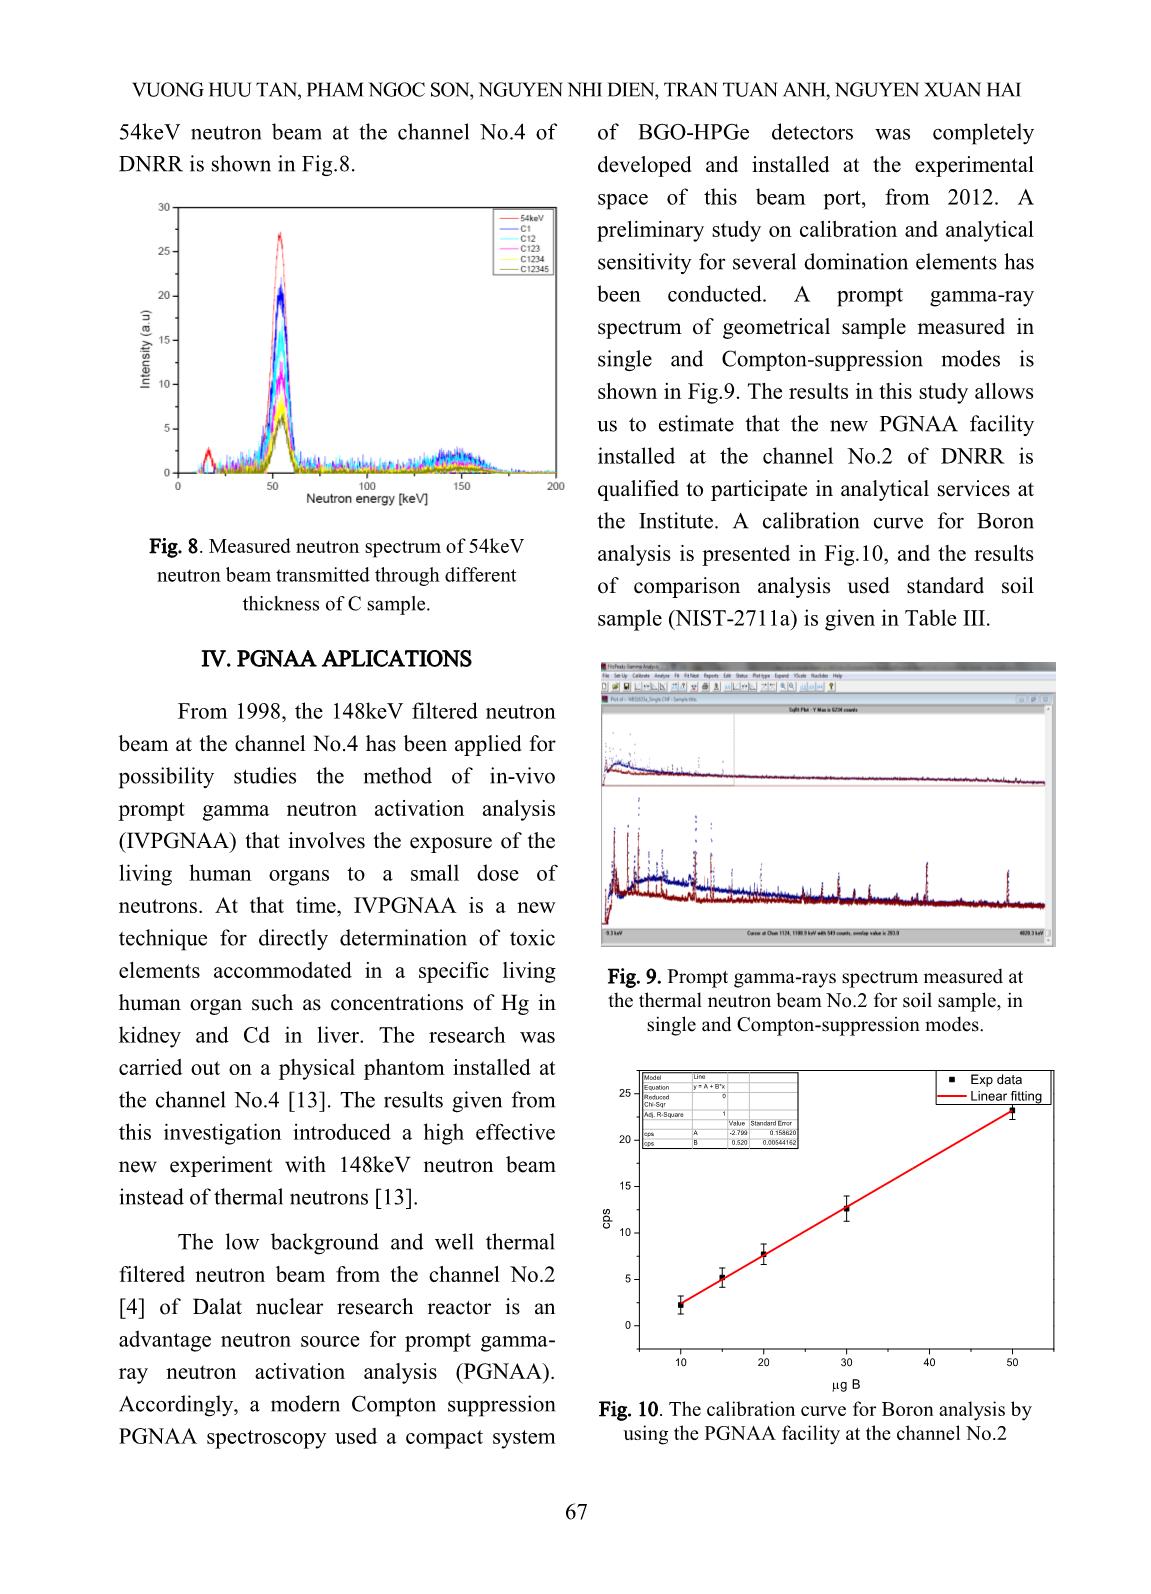 Progress of filtered neutron beams development and applications at the horizontal channels No.2 and No.4 of Dalat nuclear research reactor trang 6